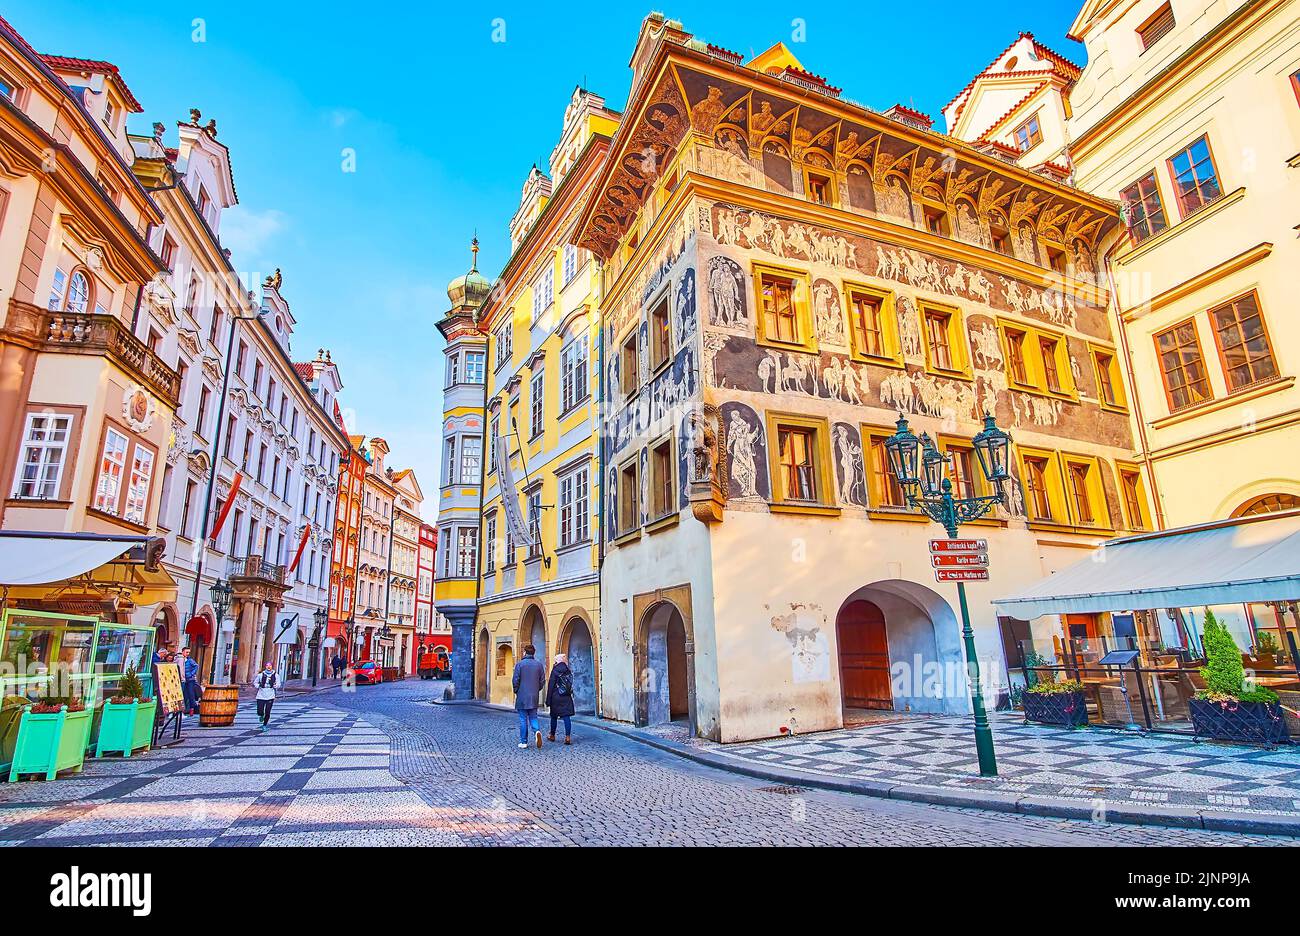 The outstanding House at the Minute (Dum u Minuty), covered with sgraffito decor, located on Old Town Square, Prague, Czech Republic Stock Photo